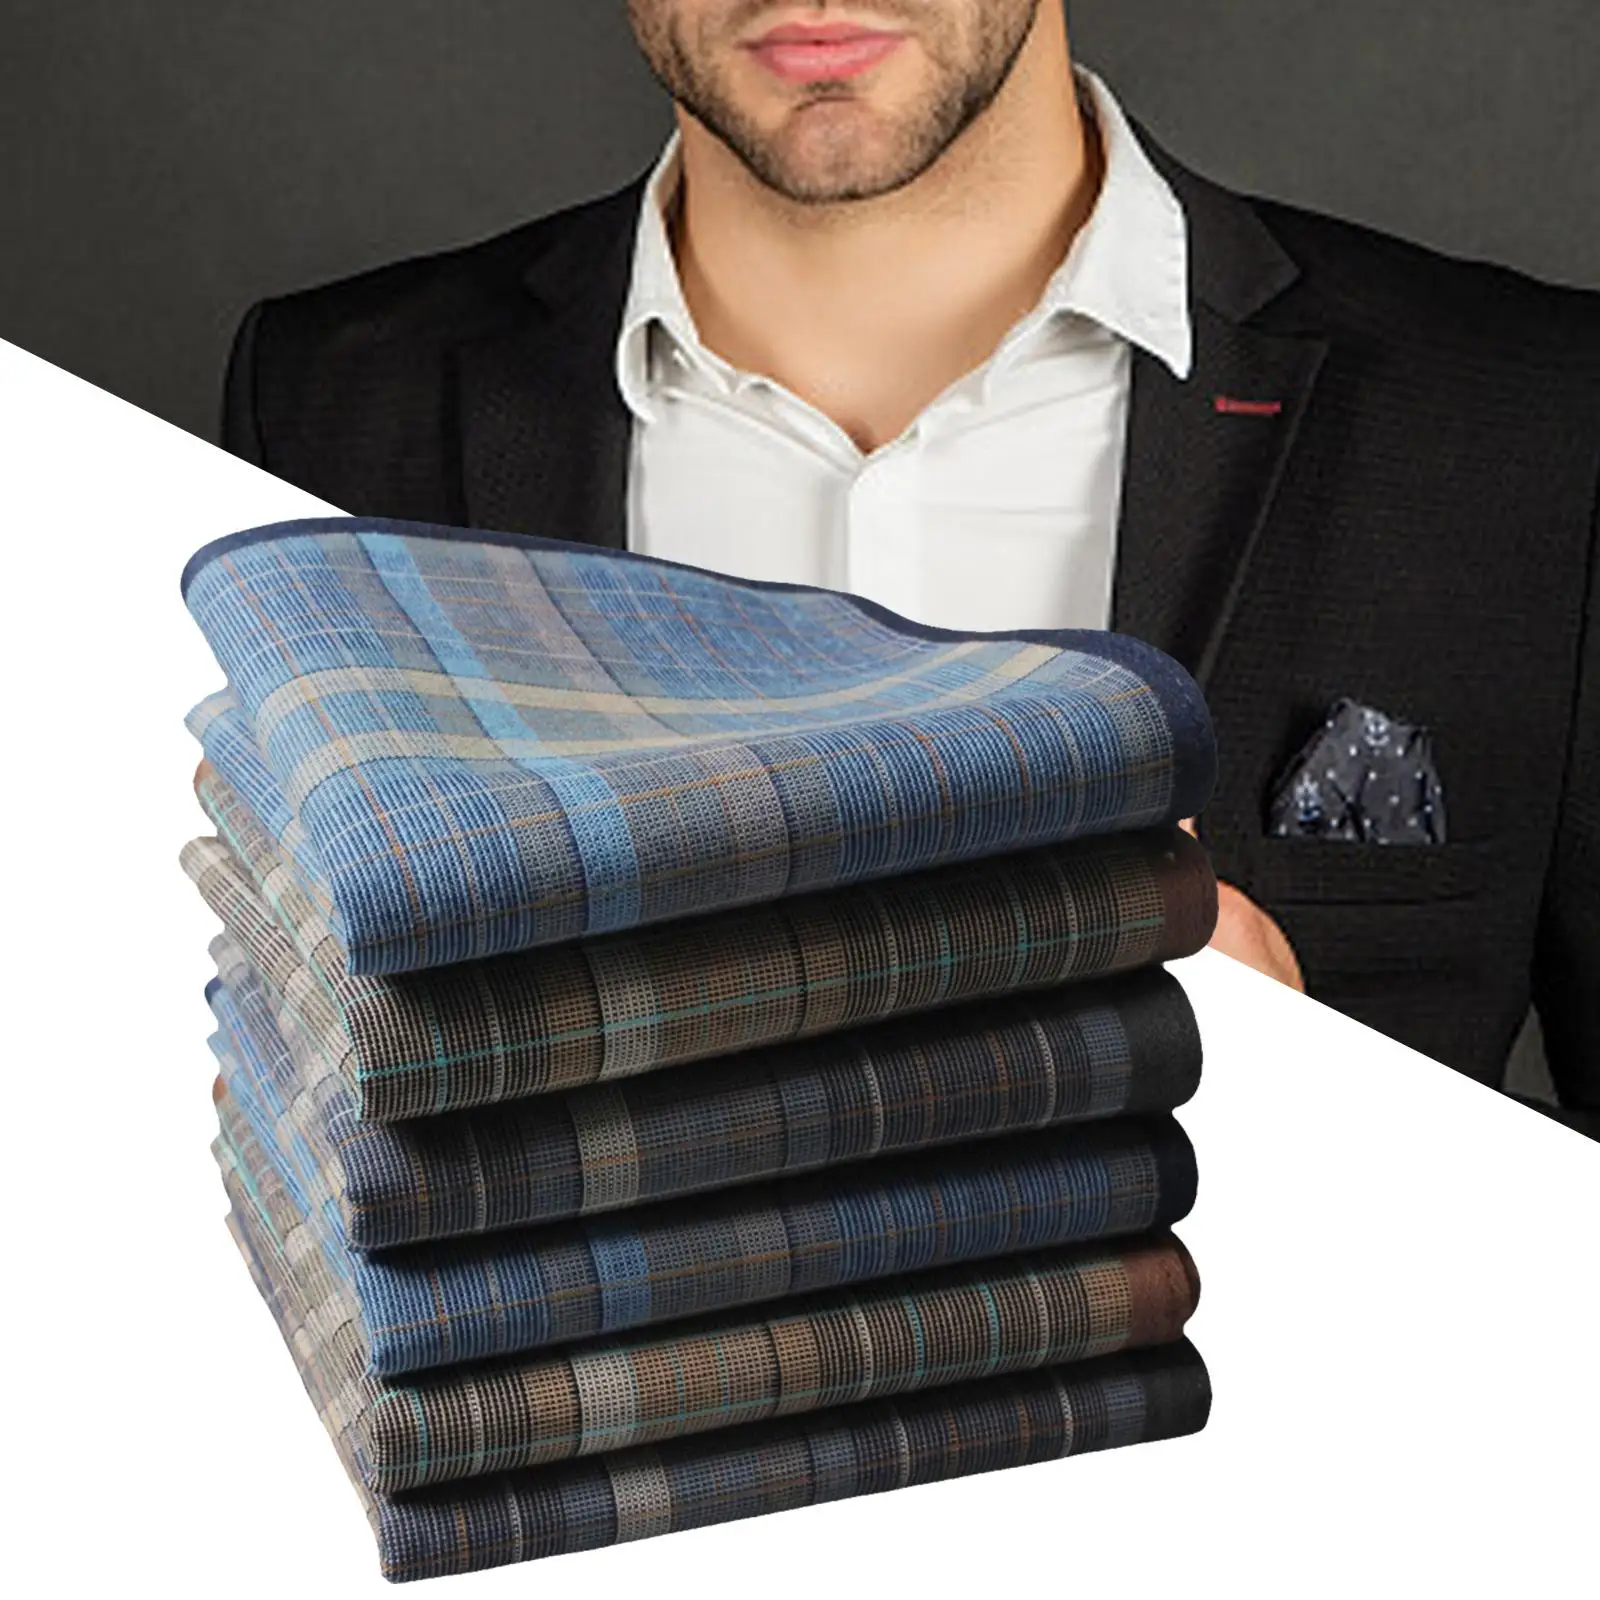 6x Handkerchiefs for Men Cotton Plaid Stripe Checkered Pattern Pocket Squares for Women Men Grandfathers Birthday Formal Casual